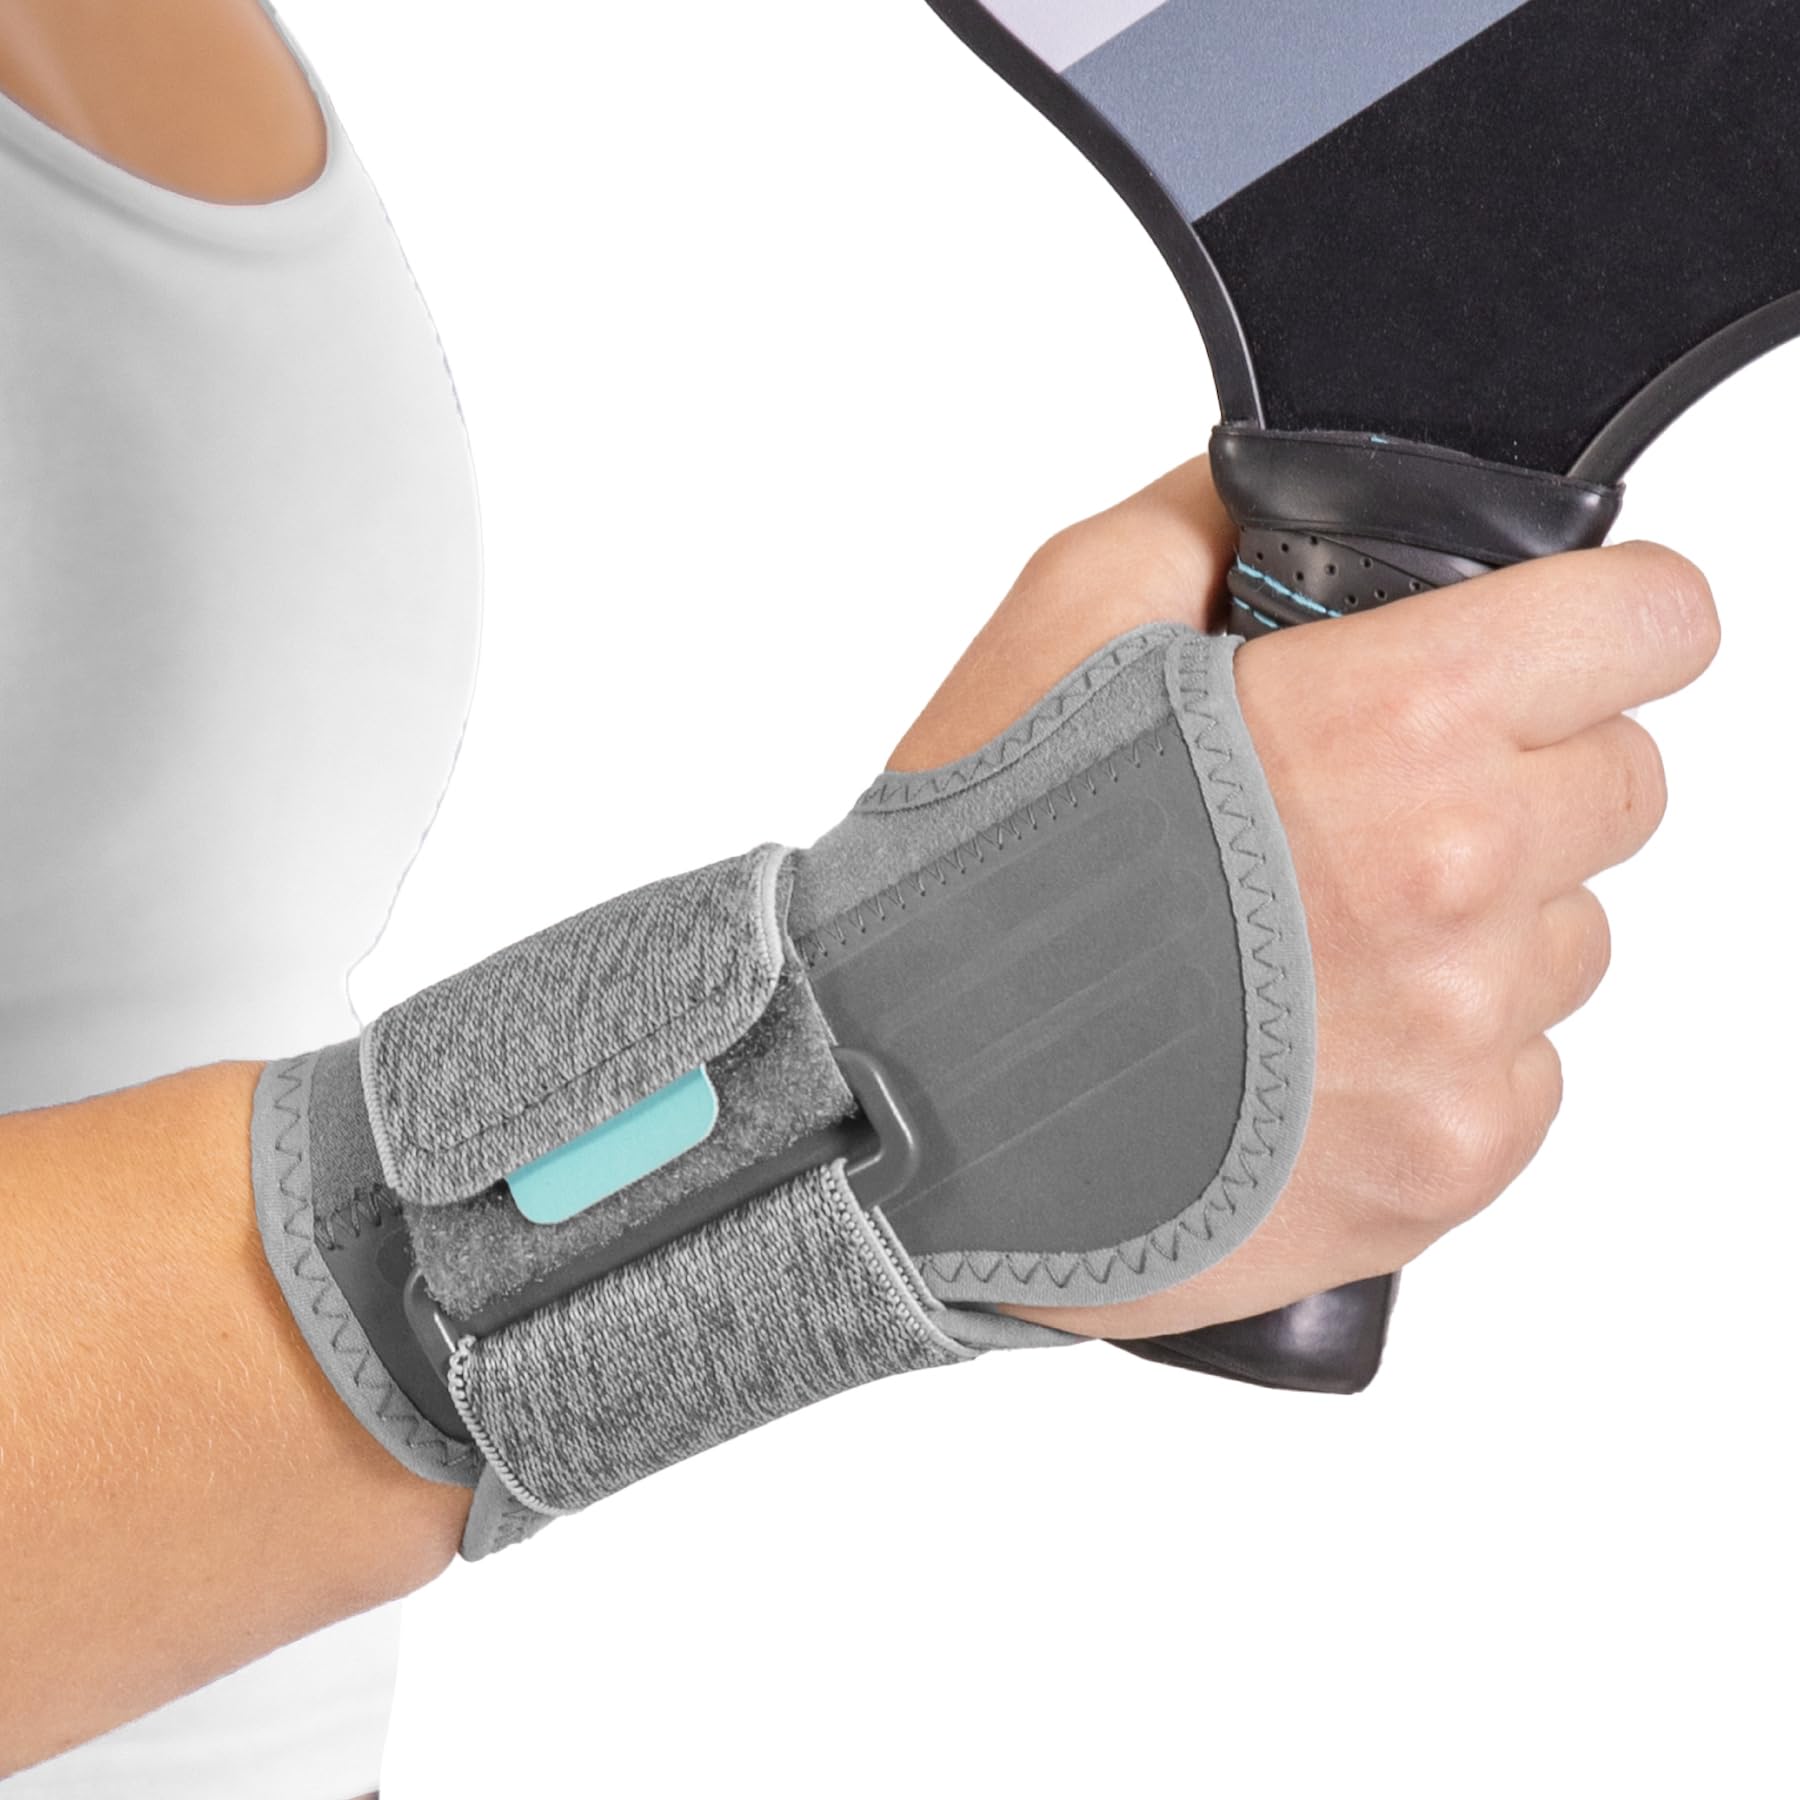 BraceAbility Court Comfort Wrist Brace - Athletic Tennis Wrist Support Wrap Compression Sleeve for Pickleball, Sprained Wrist, Tendonitis, Badminton, Racquet Sports Pain Relief Recovery (M - Right)